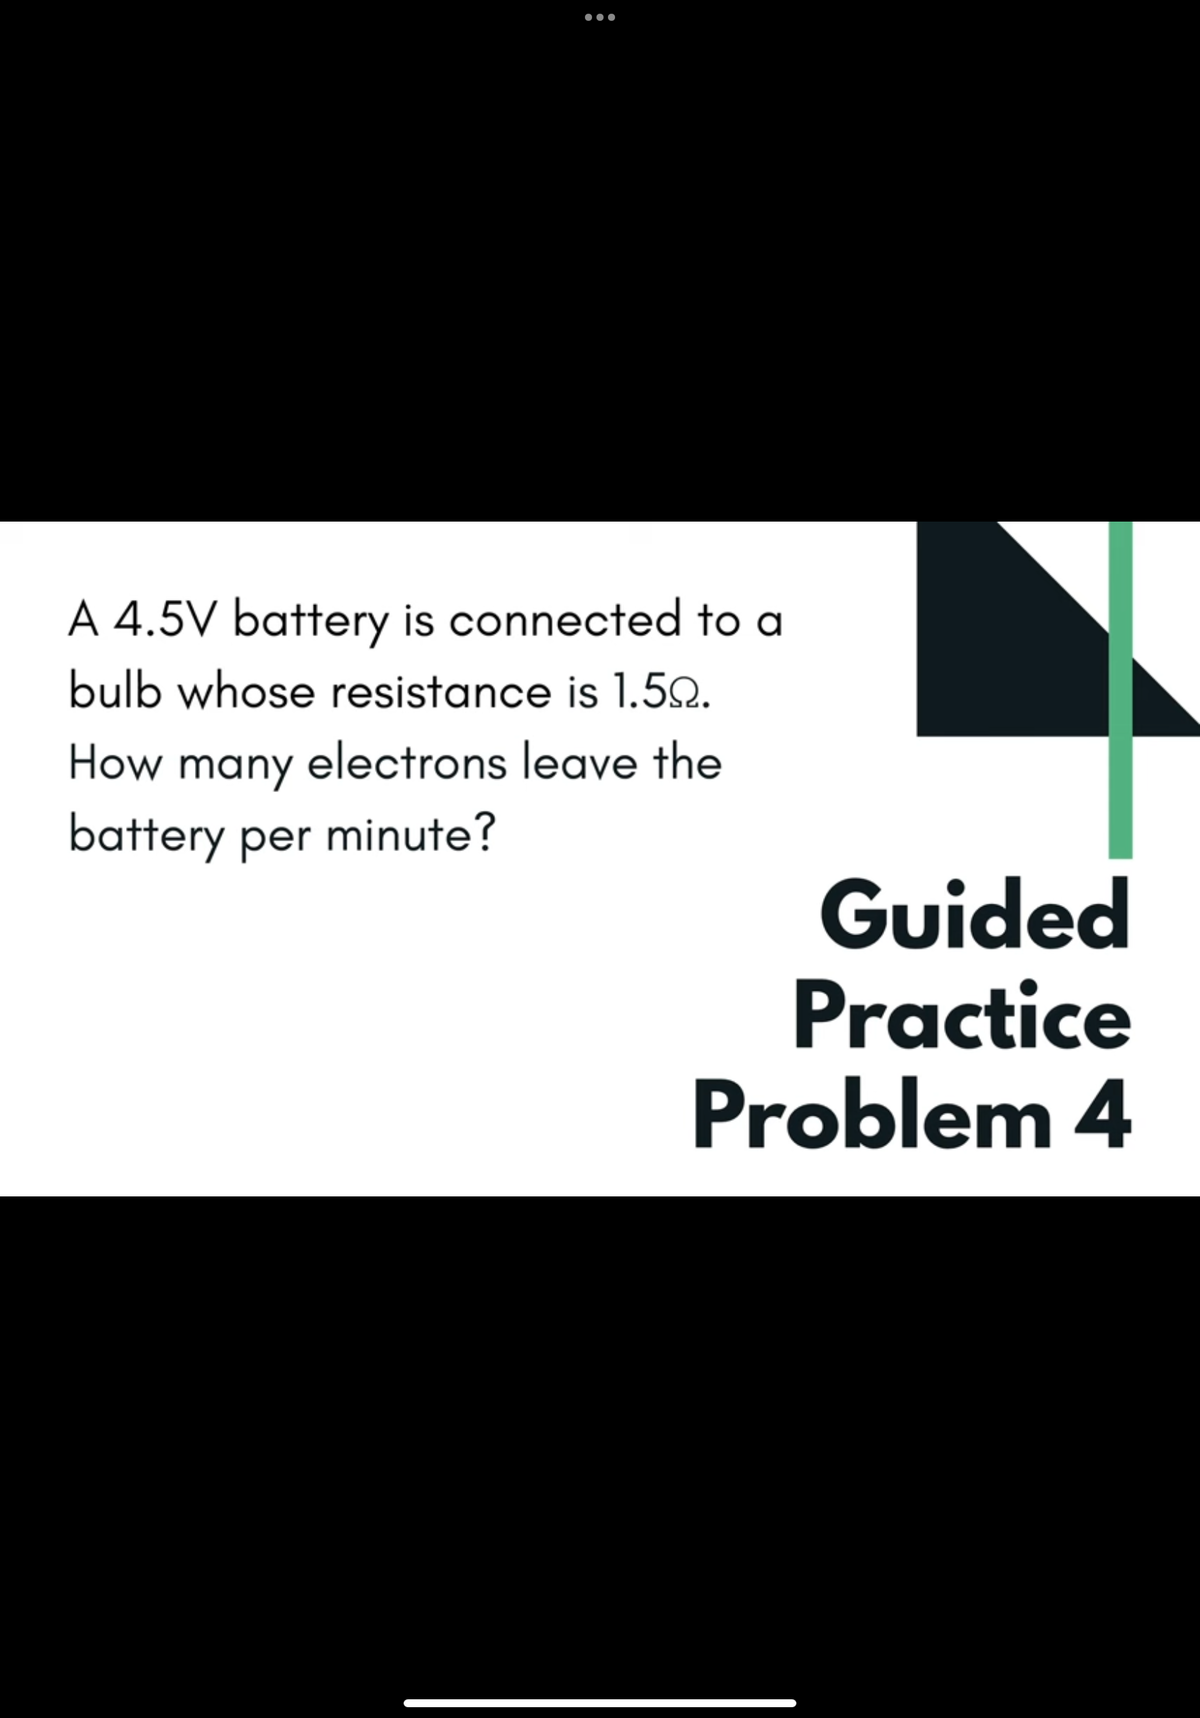 ●●●
A 4.5V battery is connected to a
bulb whose resistance is 1.59.
How many electrons leave the
battery per minute?
Guided
Practice
Problem 4